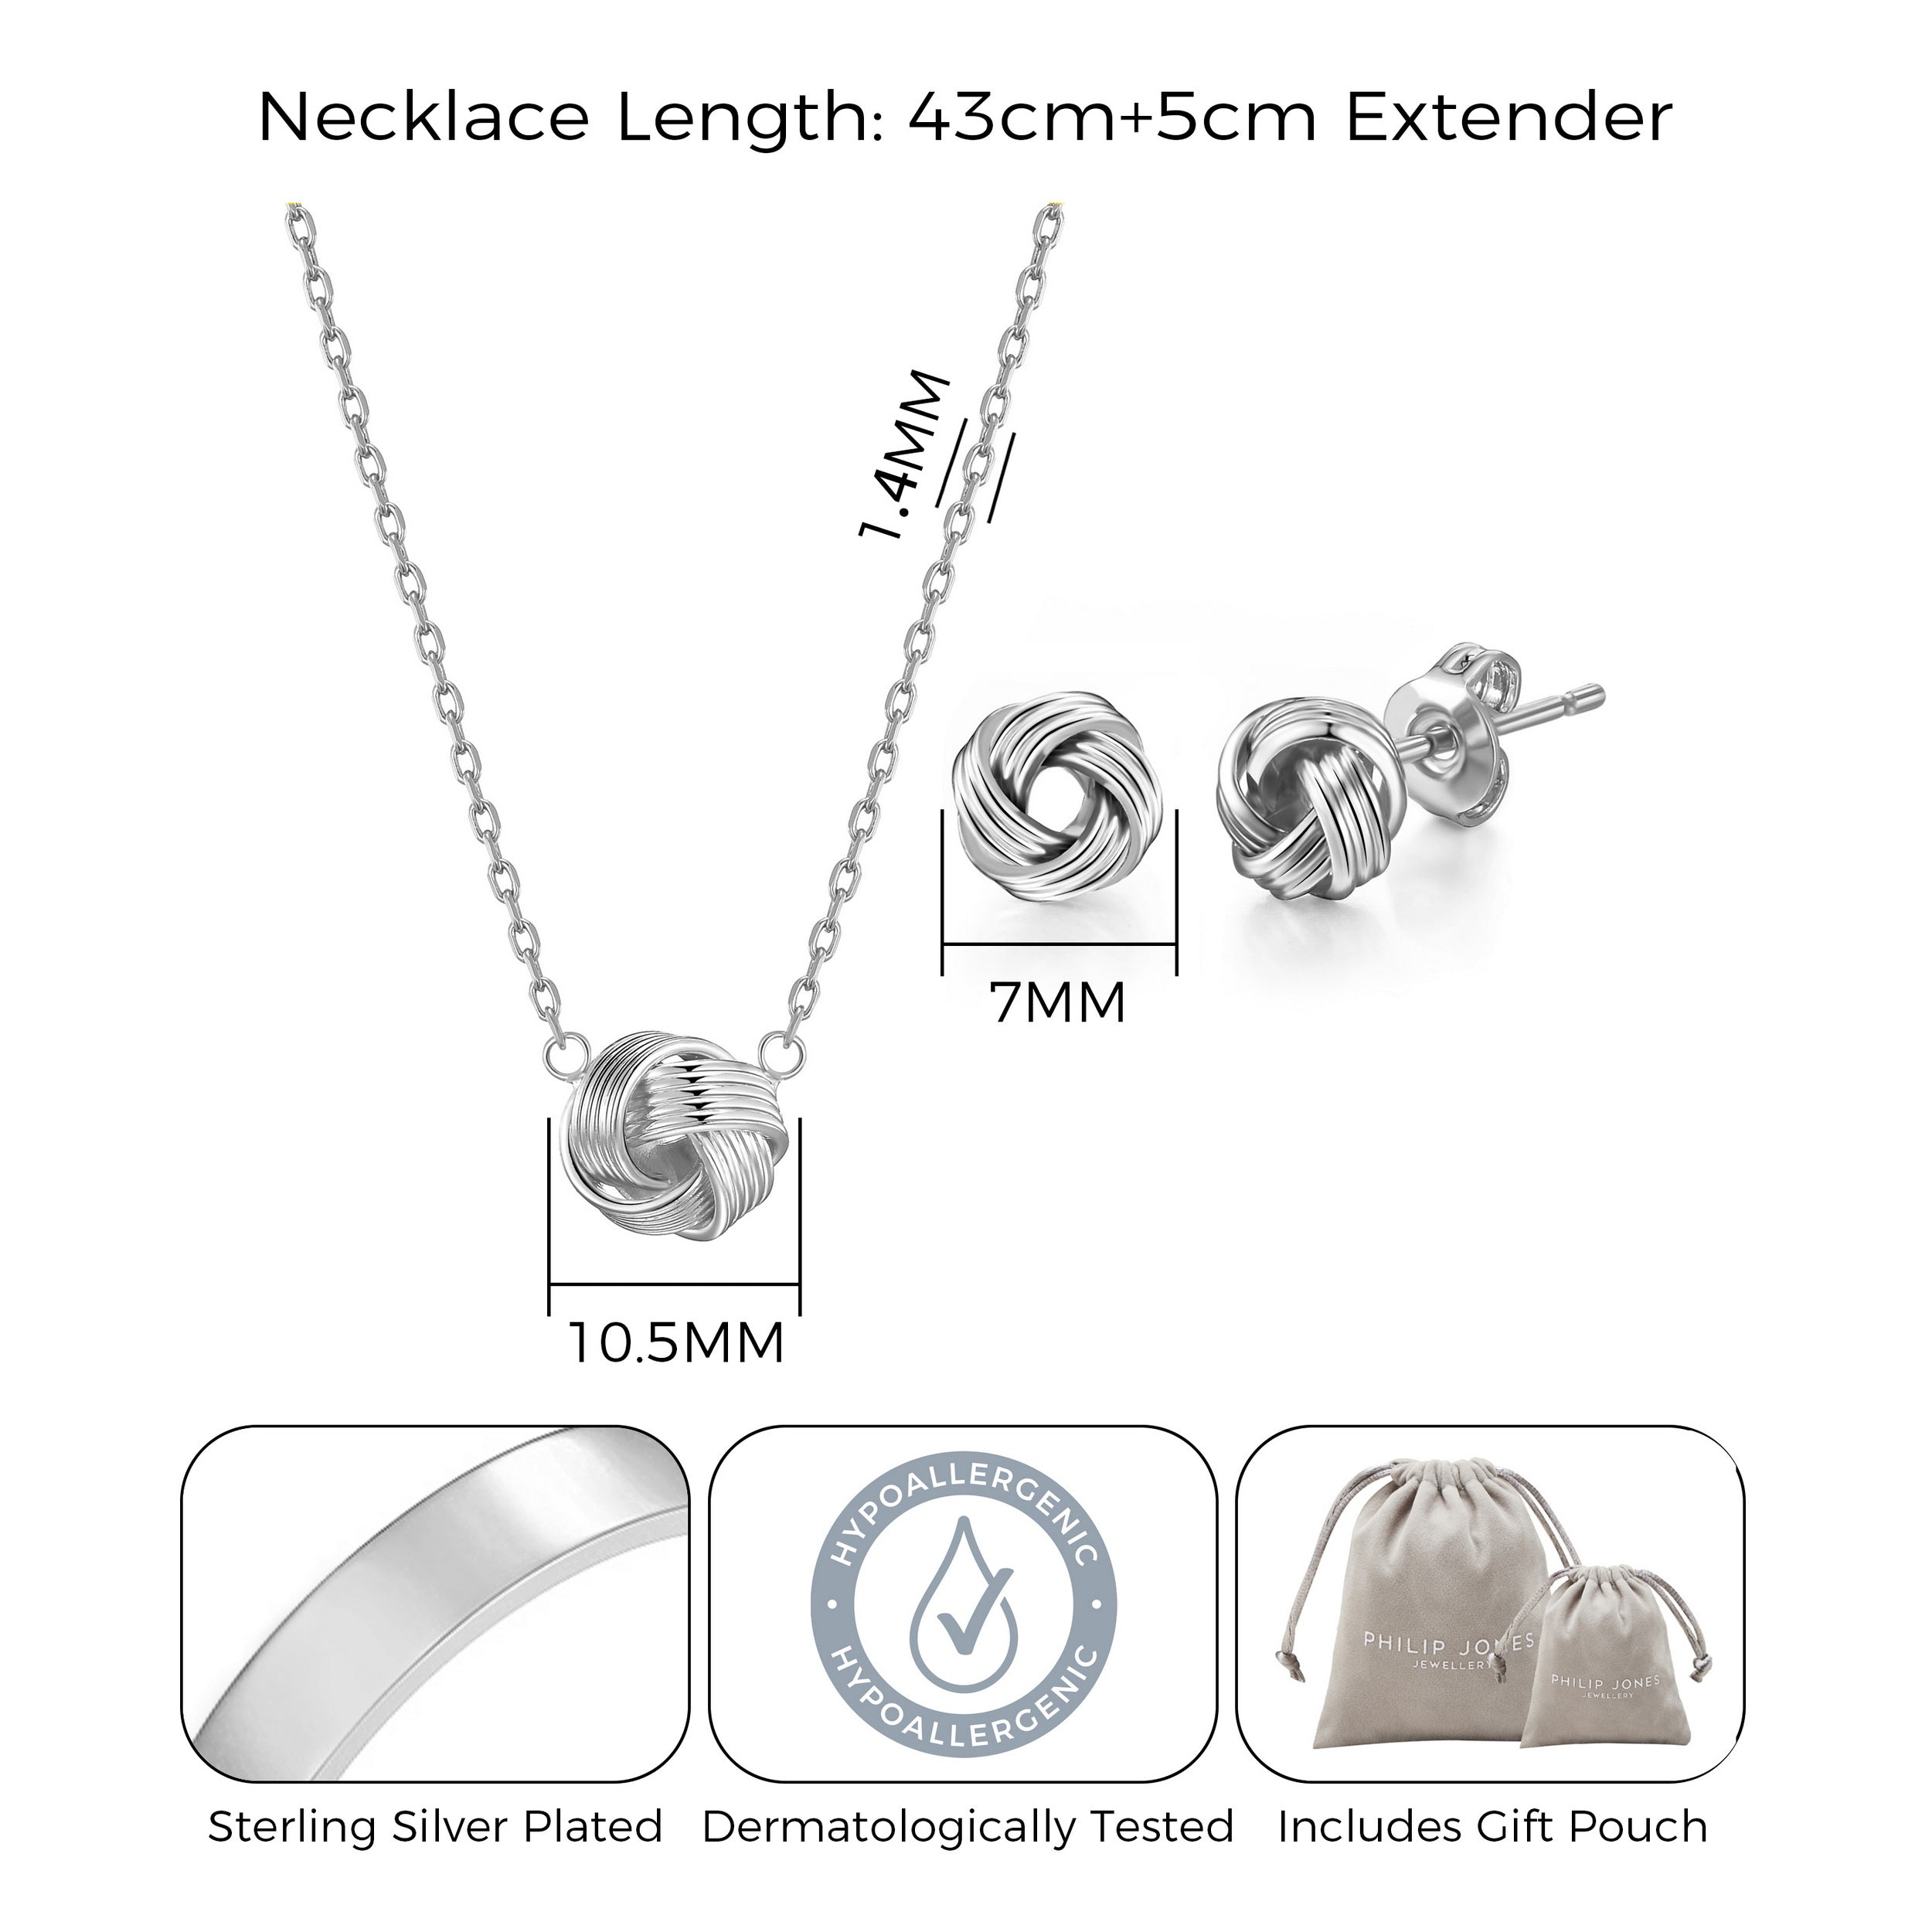 Silver Plated Love Knot Set